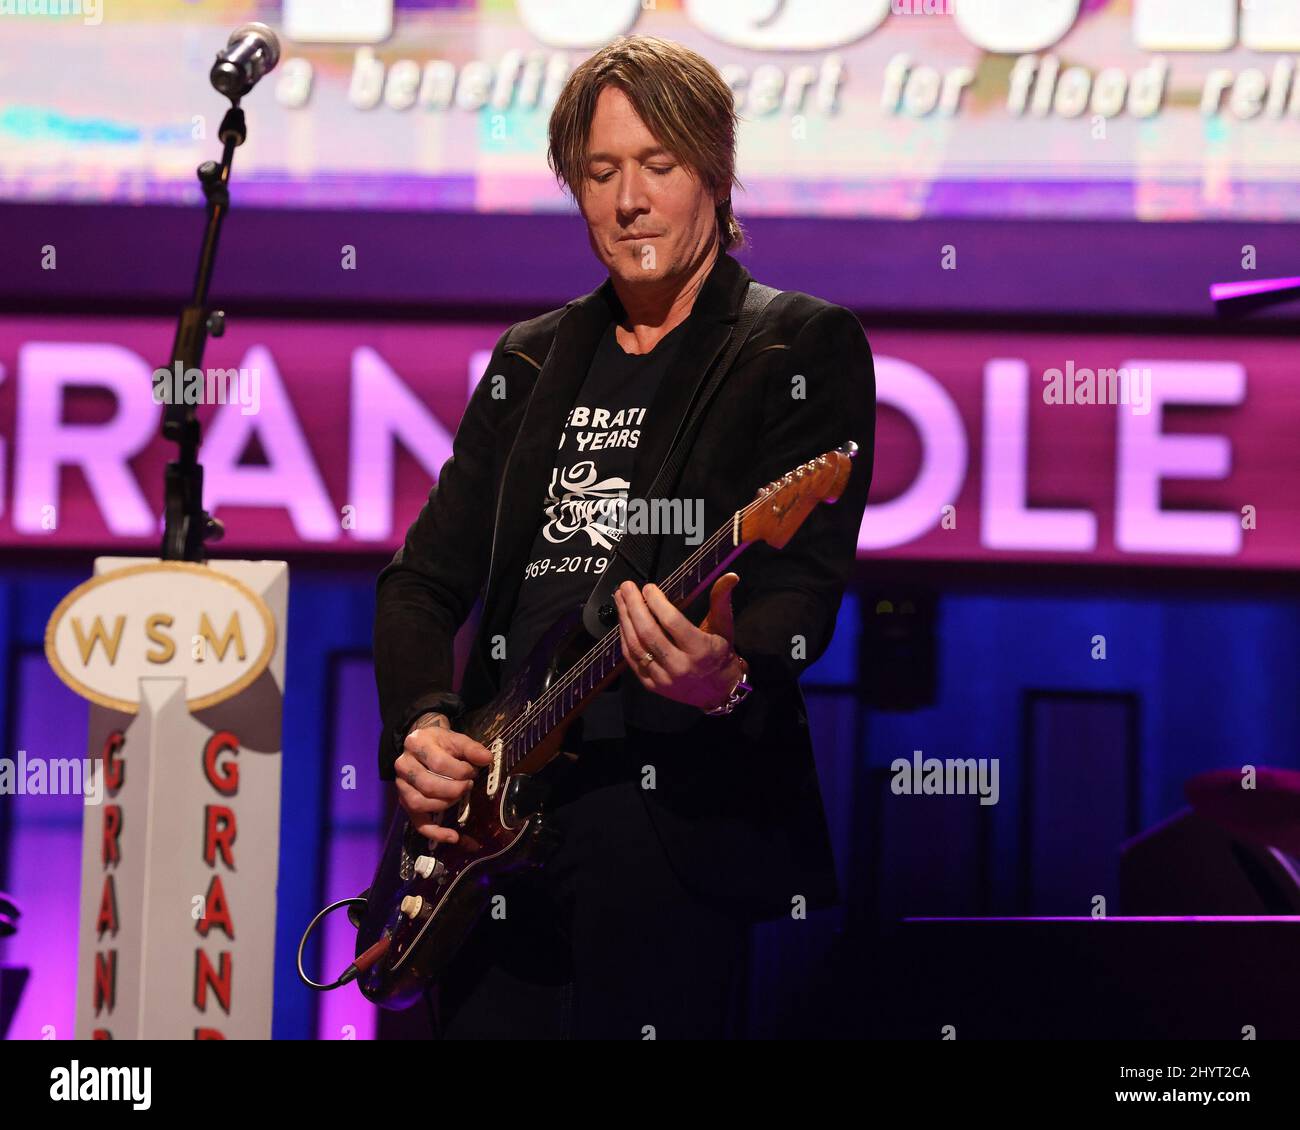 Keith Urban performing onstage at Loretta Lynn's Friends: Hometown Rising benefit concert with proceeds benefiting the United Way of Humphreys County on September 13, 2021 in Nashville, TN. Stock Photo